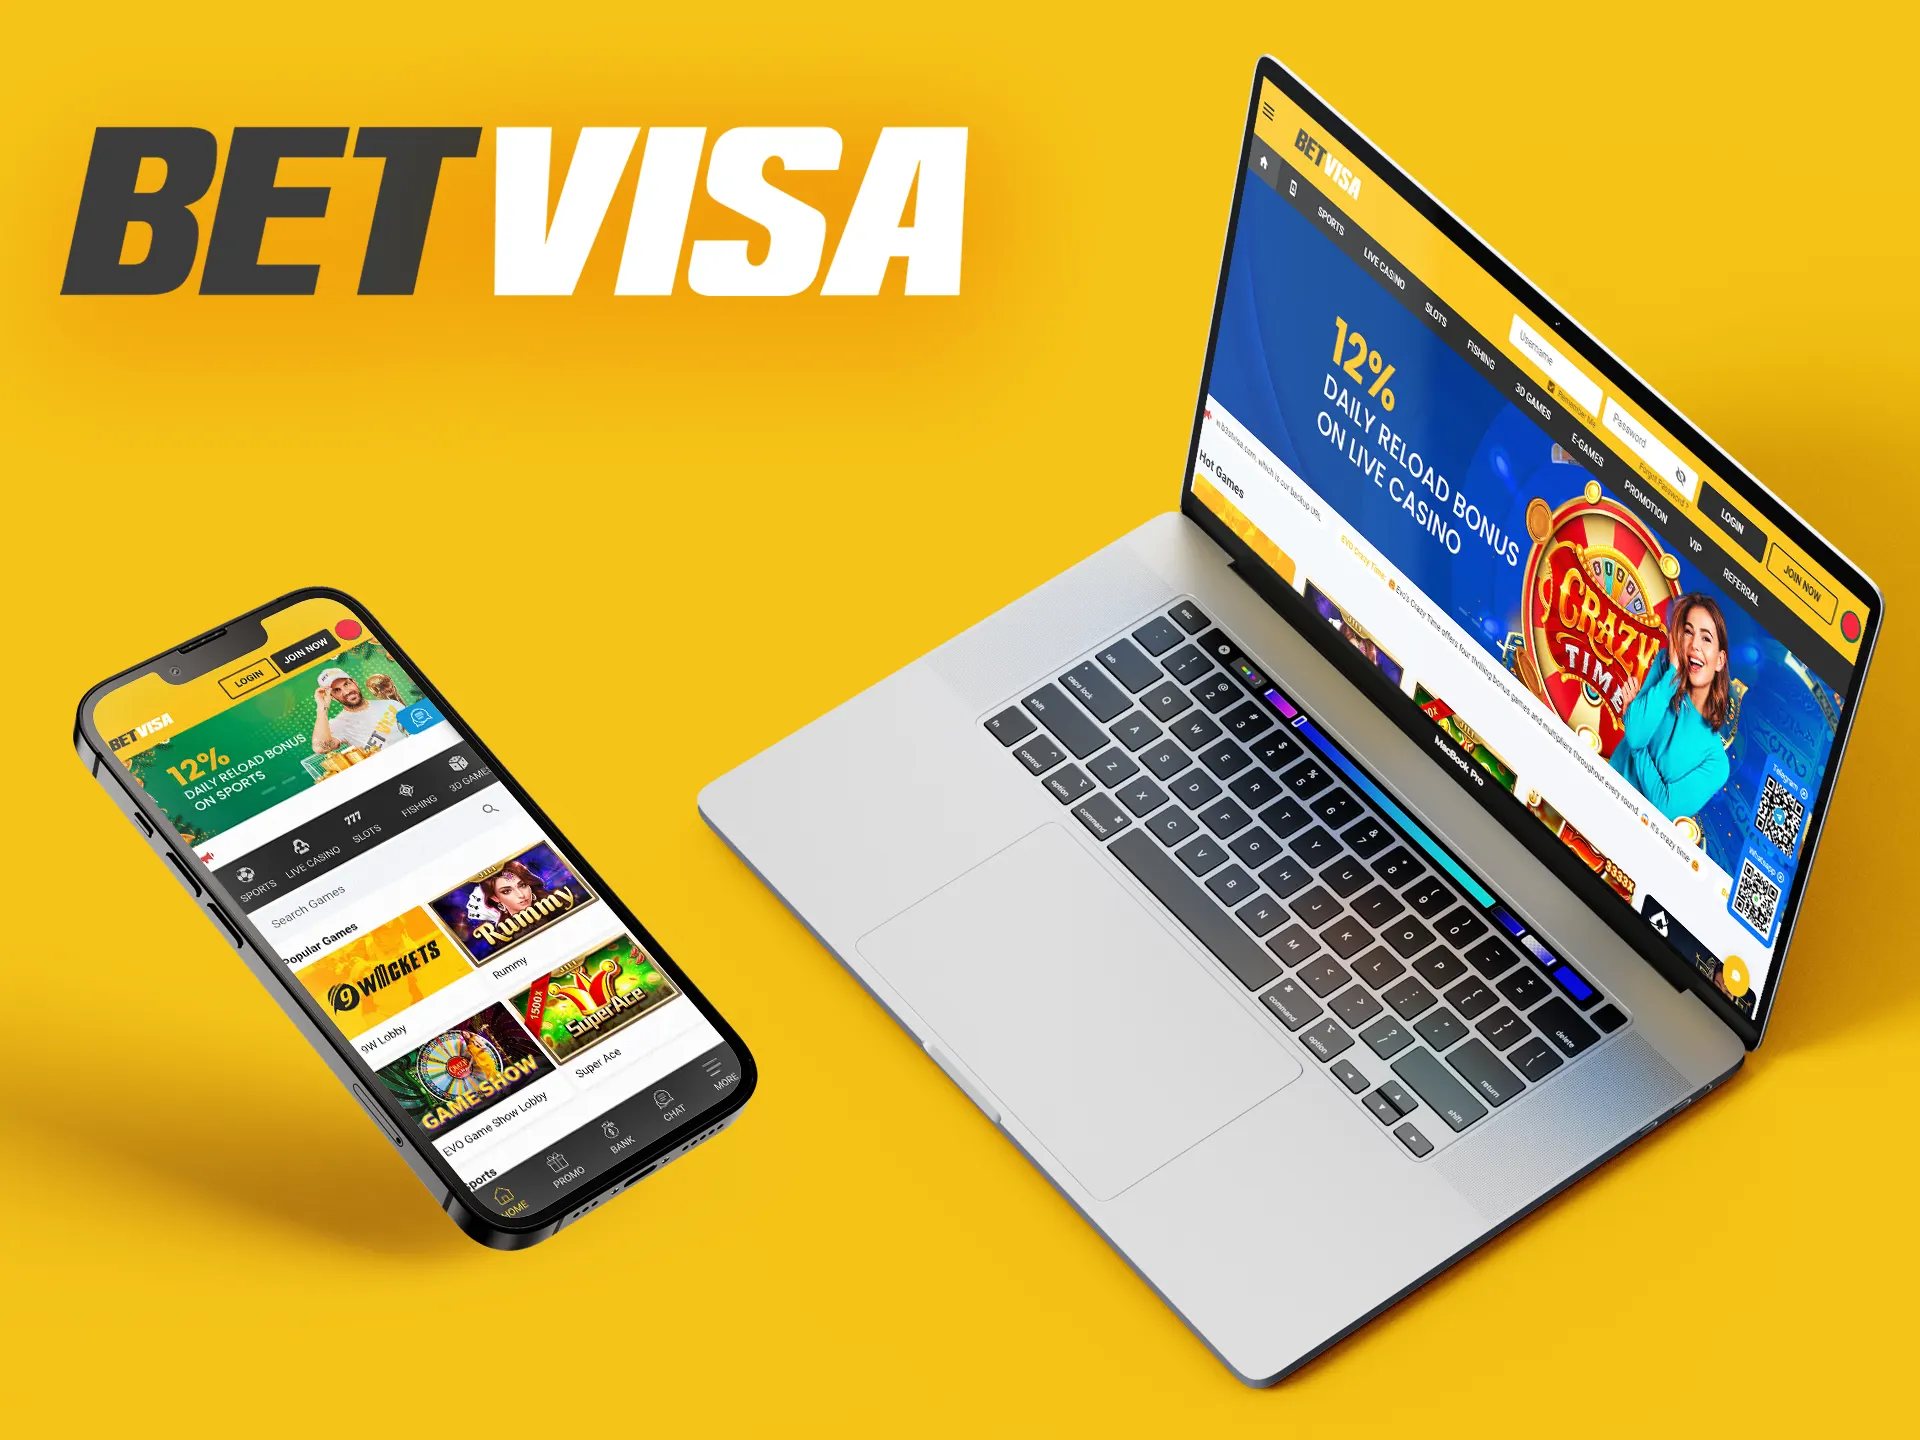 Place your bets, buy your lottery tickets on the fast-growing Betvisa website.